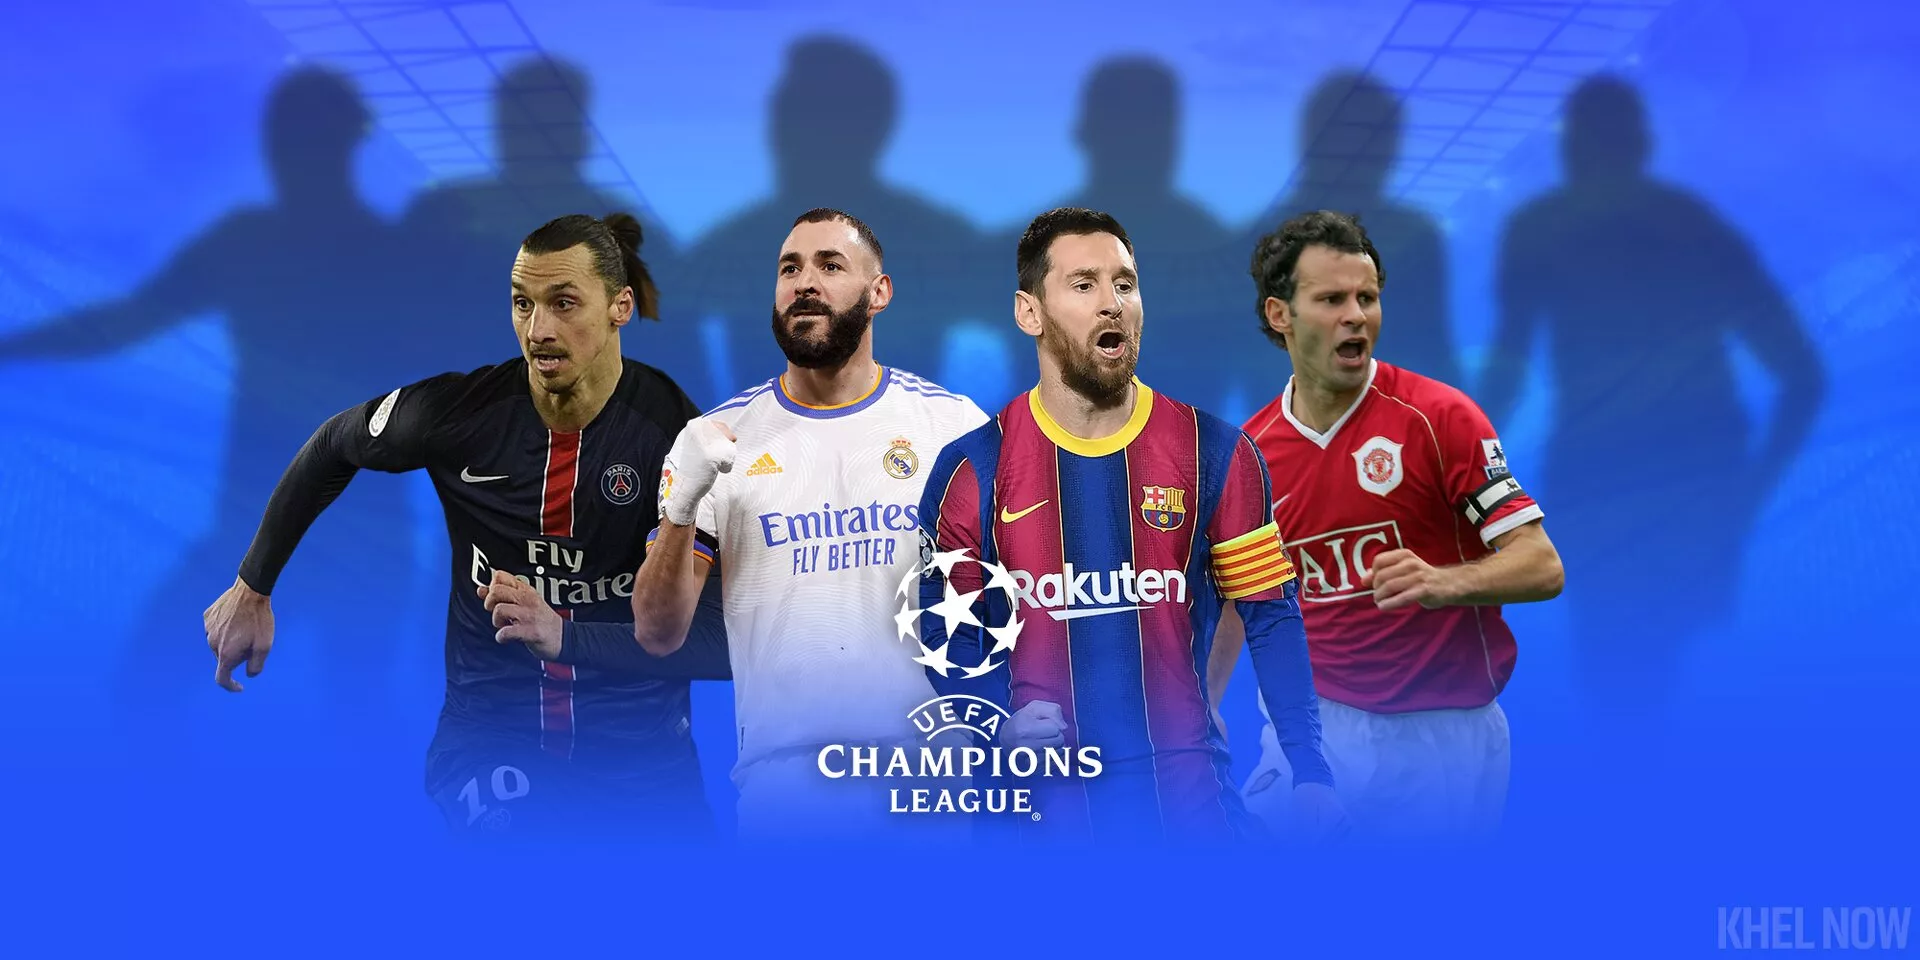 UEFA Champions League 2010/11: Top 20 Players To Watch, News, Scores,  Highlights, Stats, and Rumors